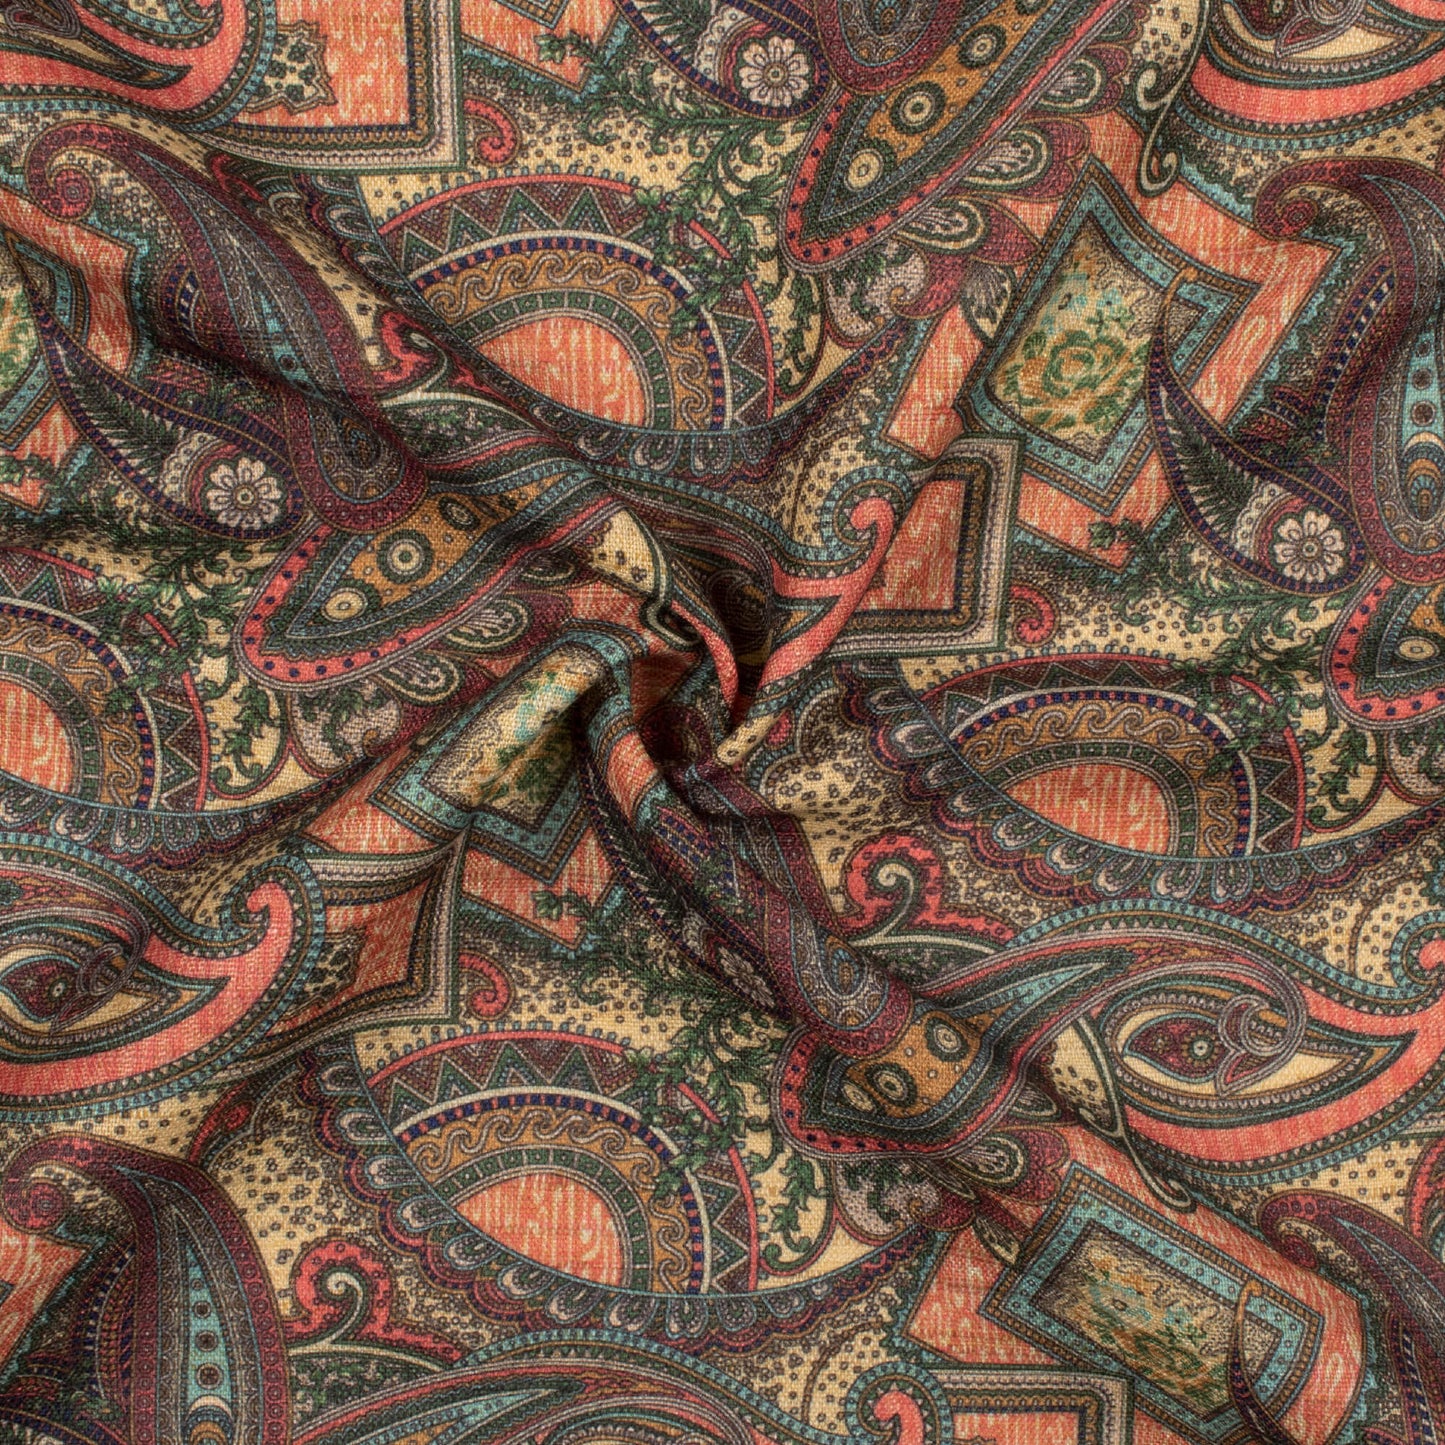 Coral Peach And Maroon Paisley Pattern Digital Print Textured Blend Fabric (Width 58 Inches)